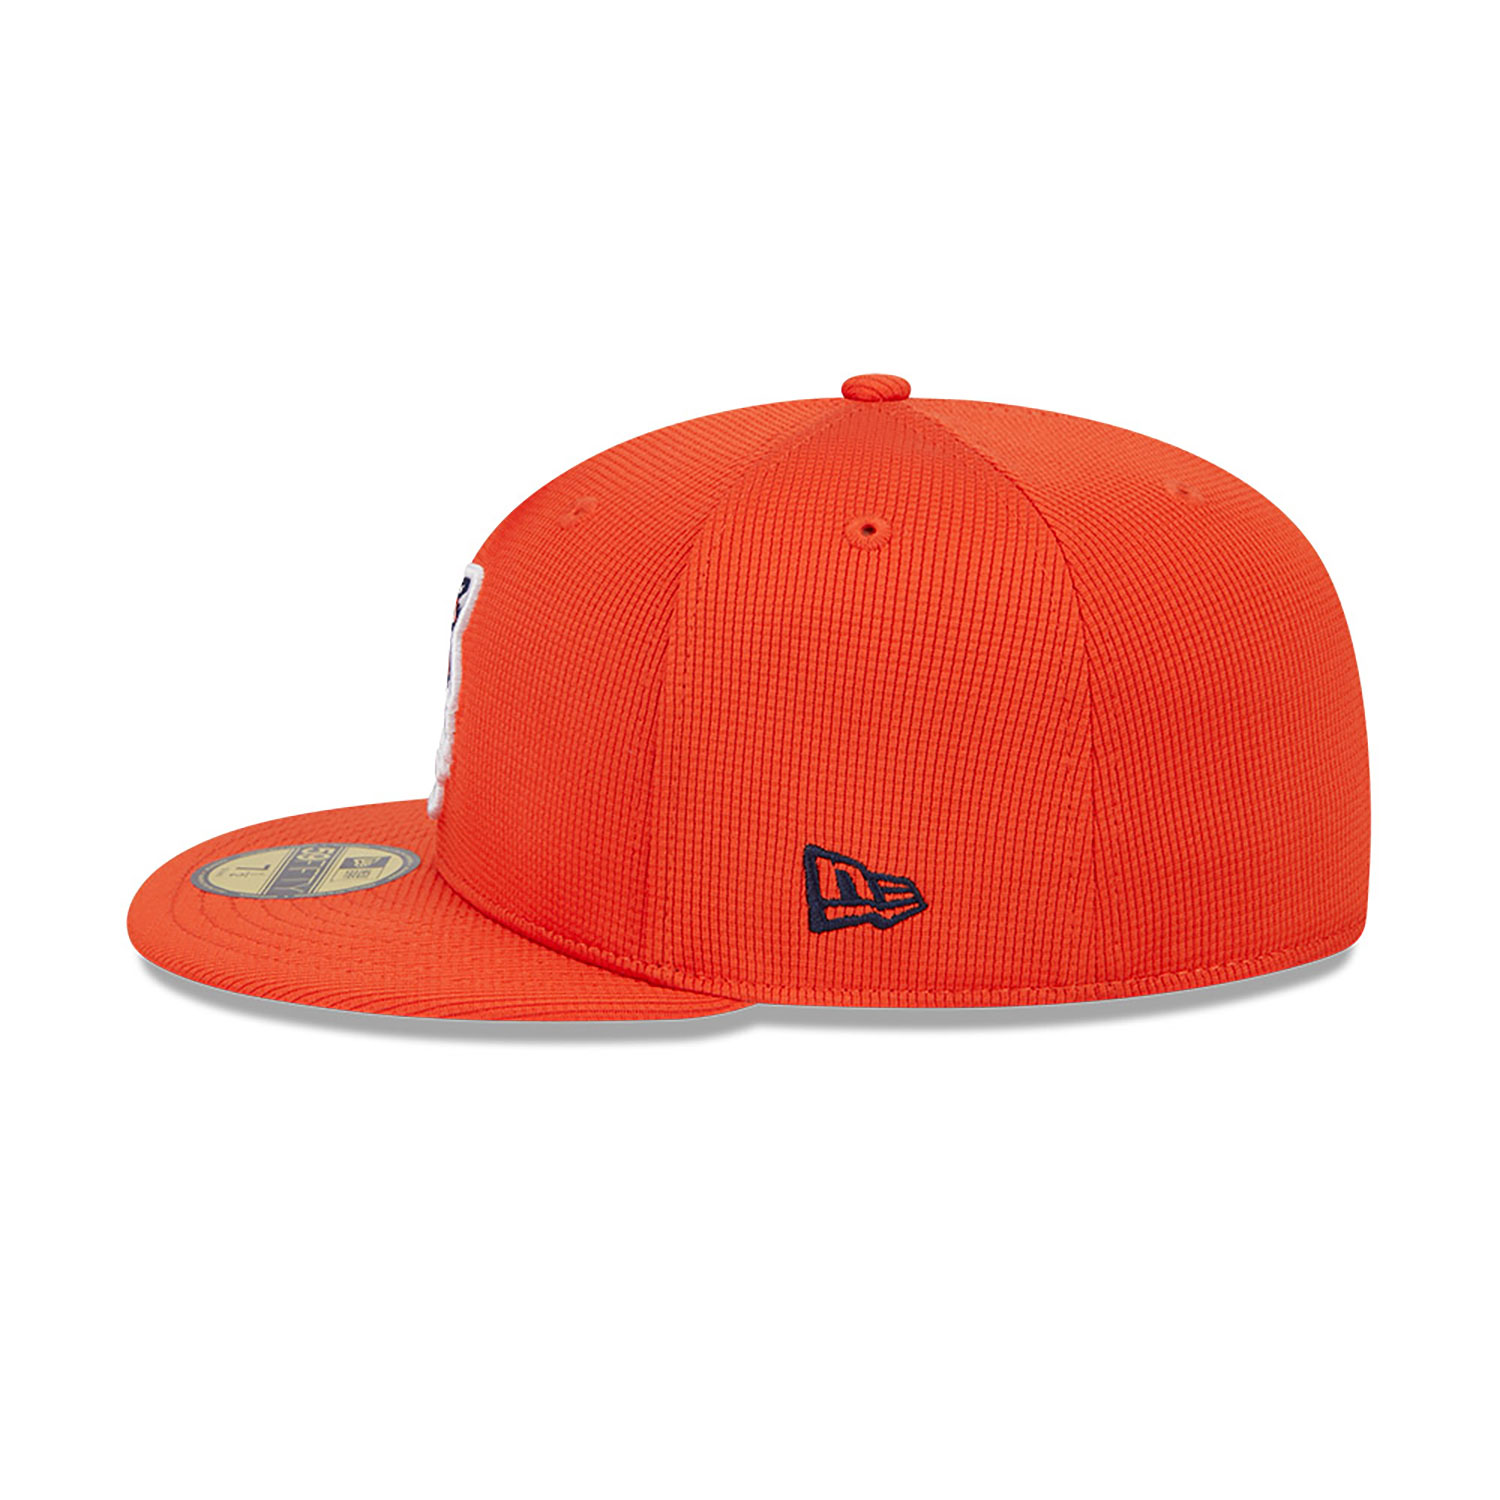 Detroit Tigers Spring Training Orange 59FIFTY Fitted Cap